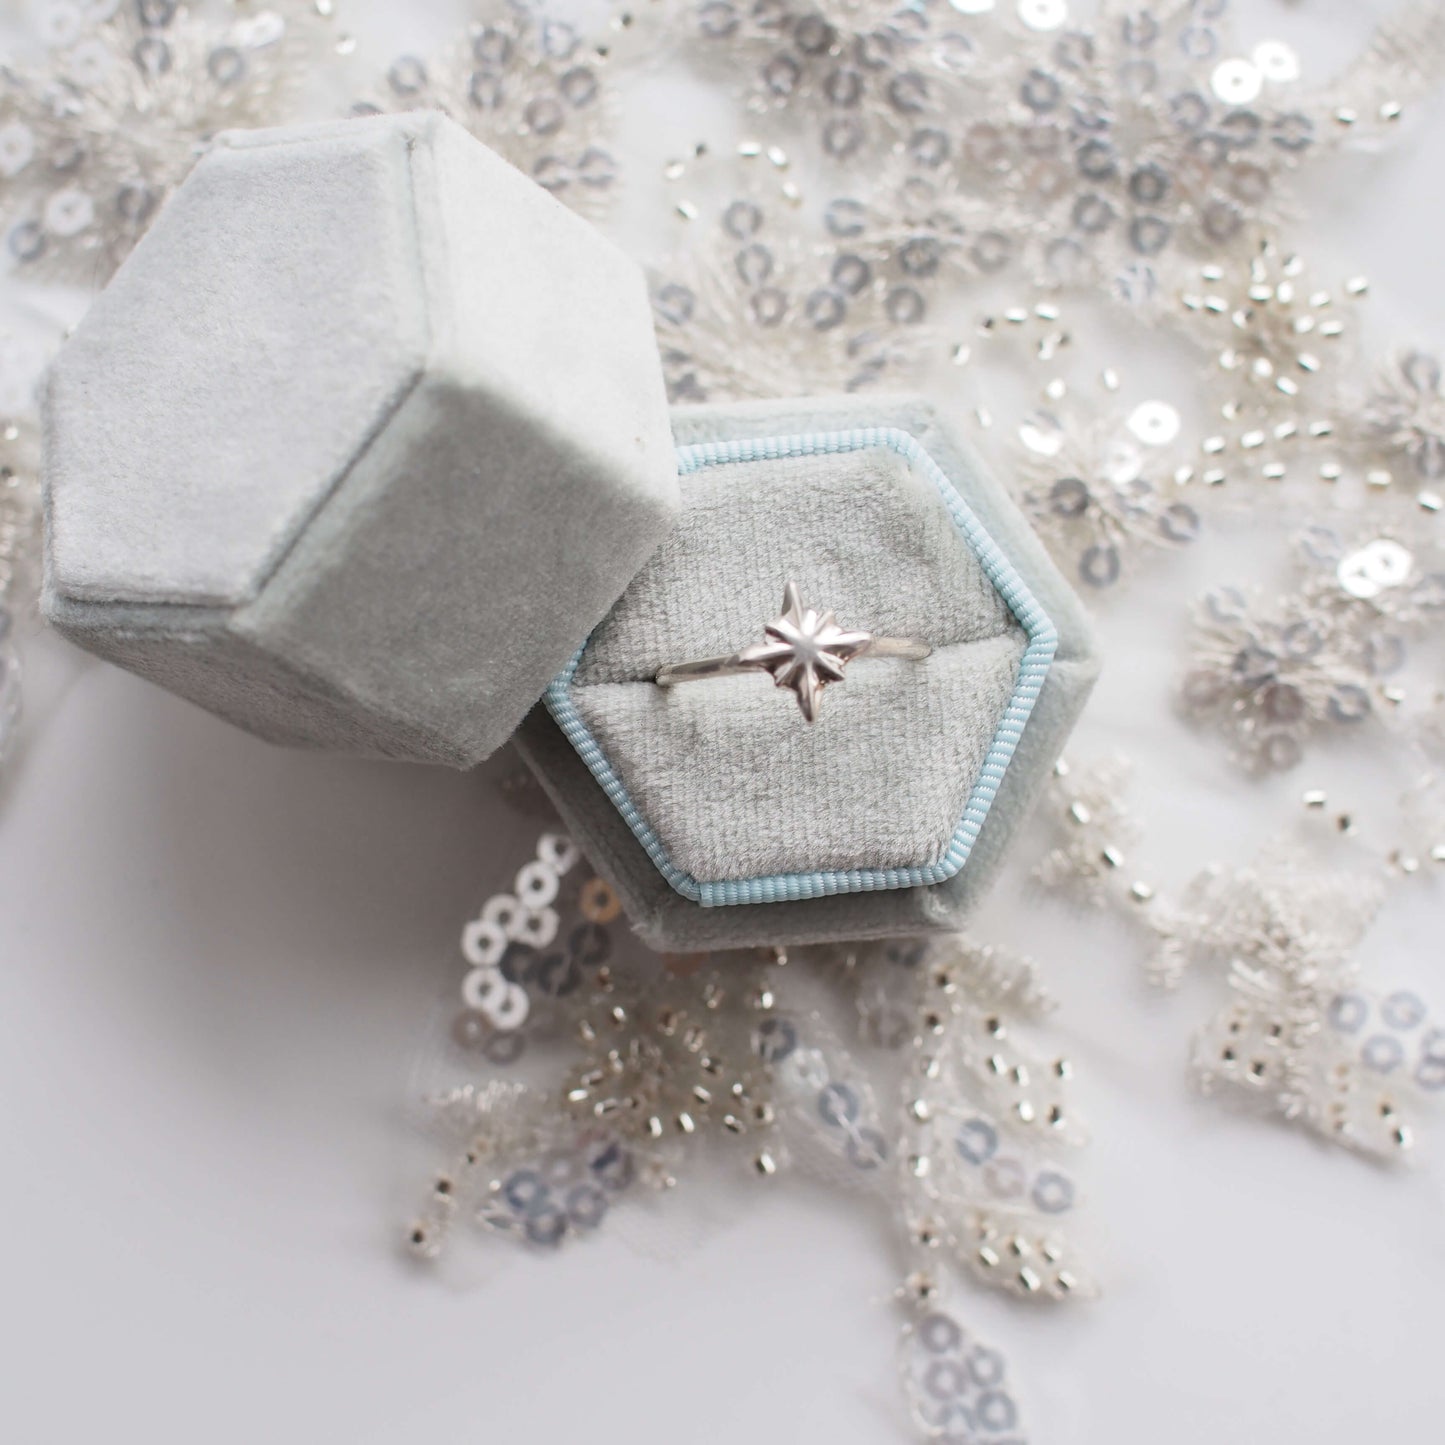 Celestial North Star Ring in sterling silver held in pale blue velvet ring box on top of bridal lace